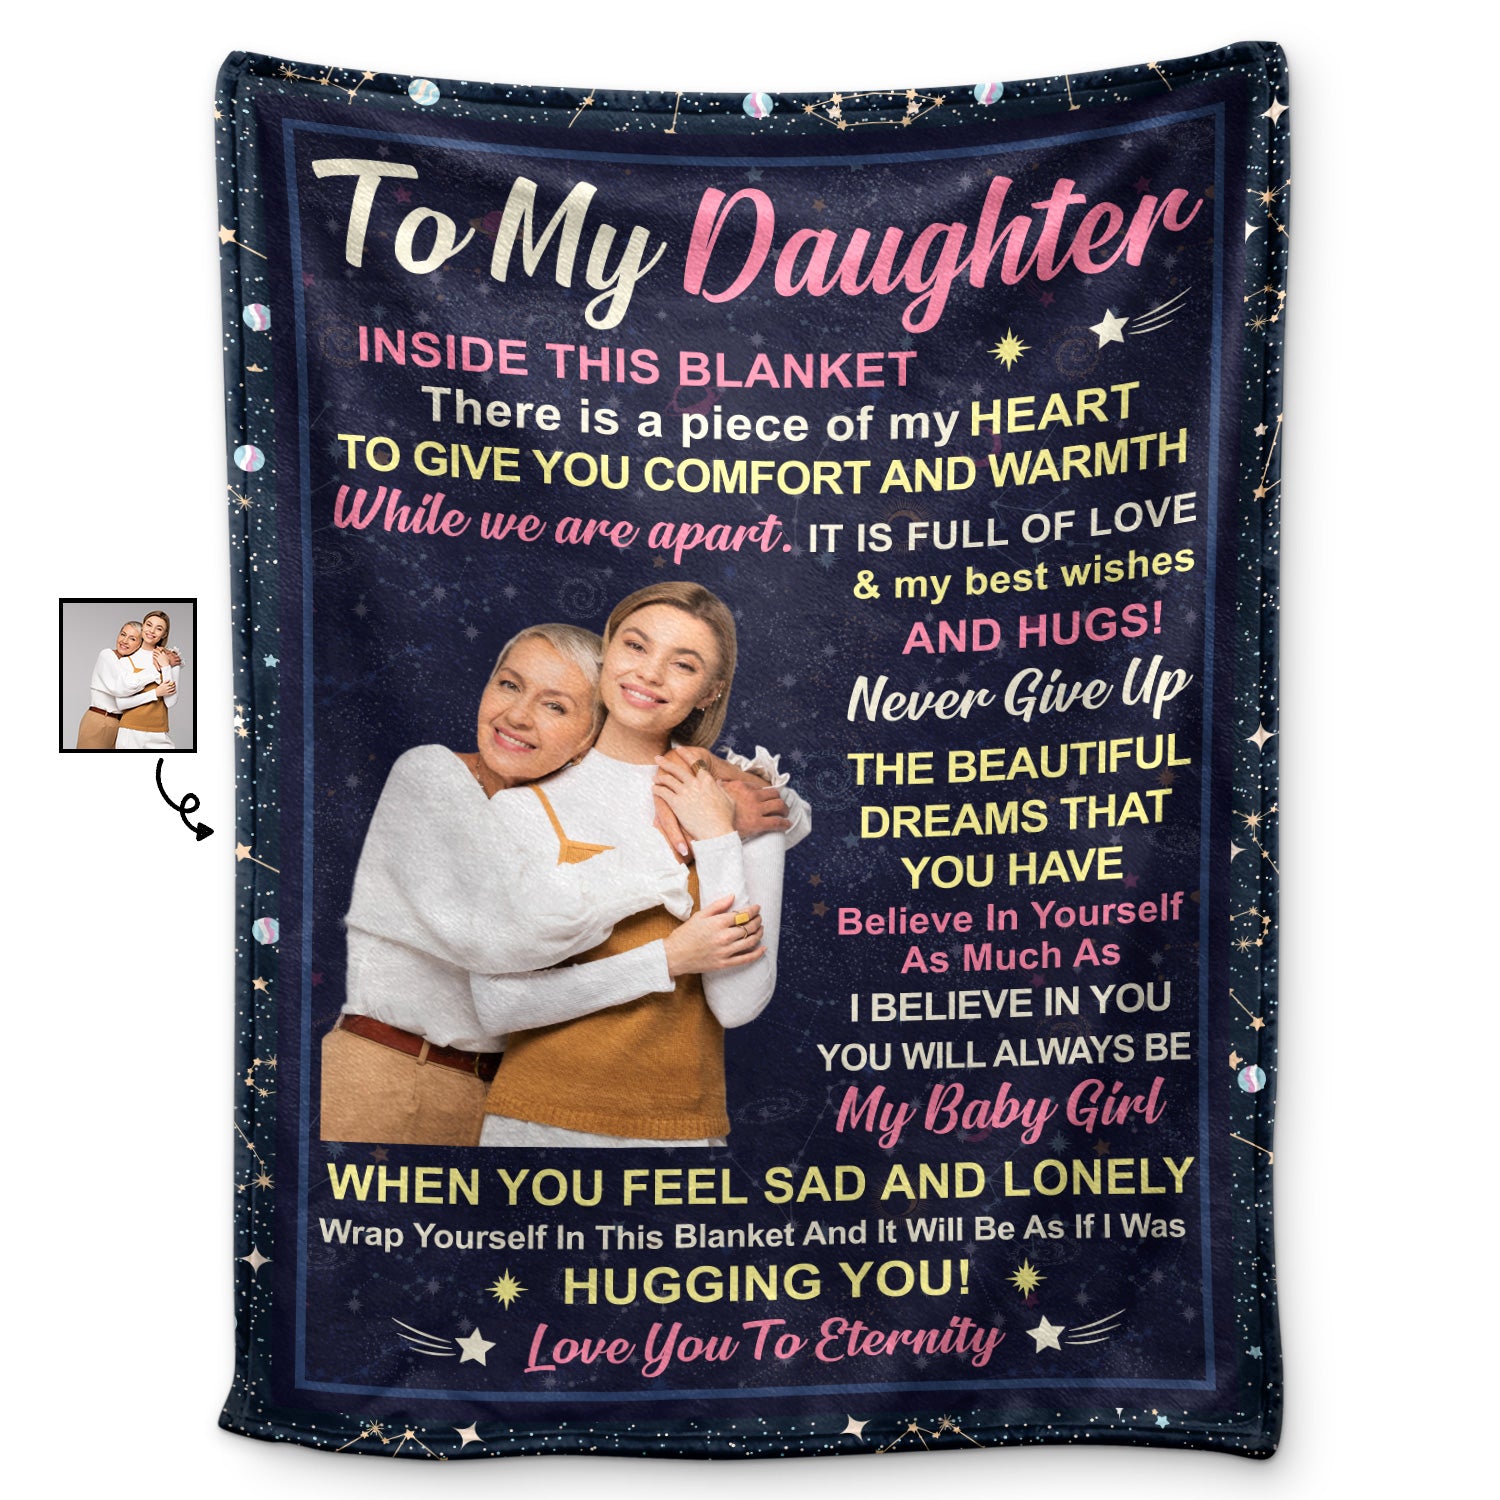 Custom Photo When You Feel Sad And Lonely Wrap Yourself In This - Birthday, Loving Gift For Mom, Mother, Nana, Grandma - Personalized Fleece Blanket, Sherpa Blanket